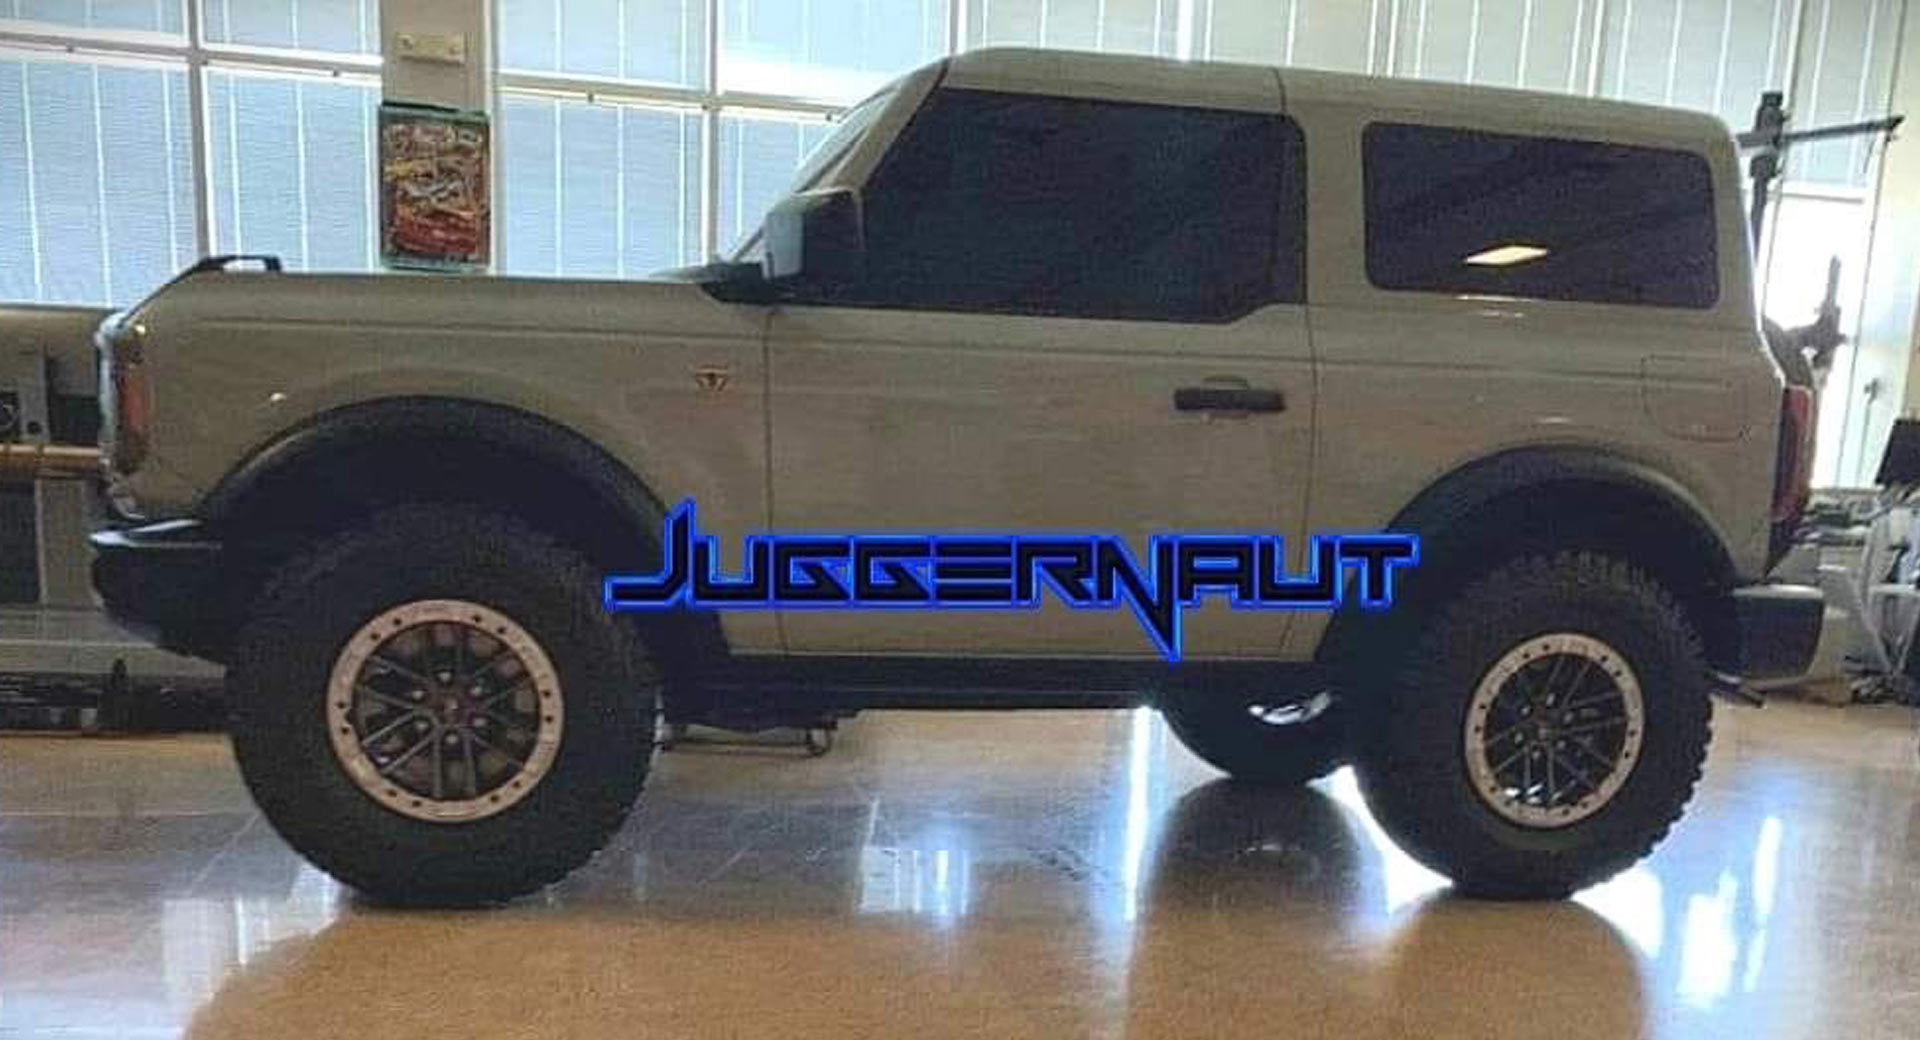 New 2021 Ford Bronco Leaked Photo Looks Like The Real Deal ...